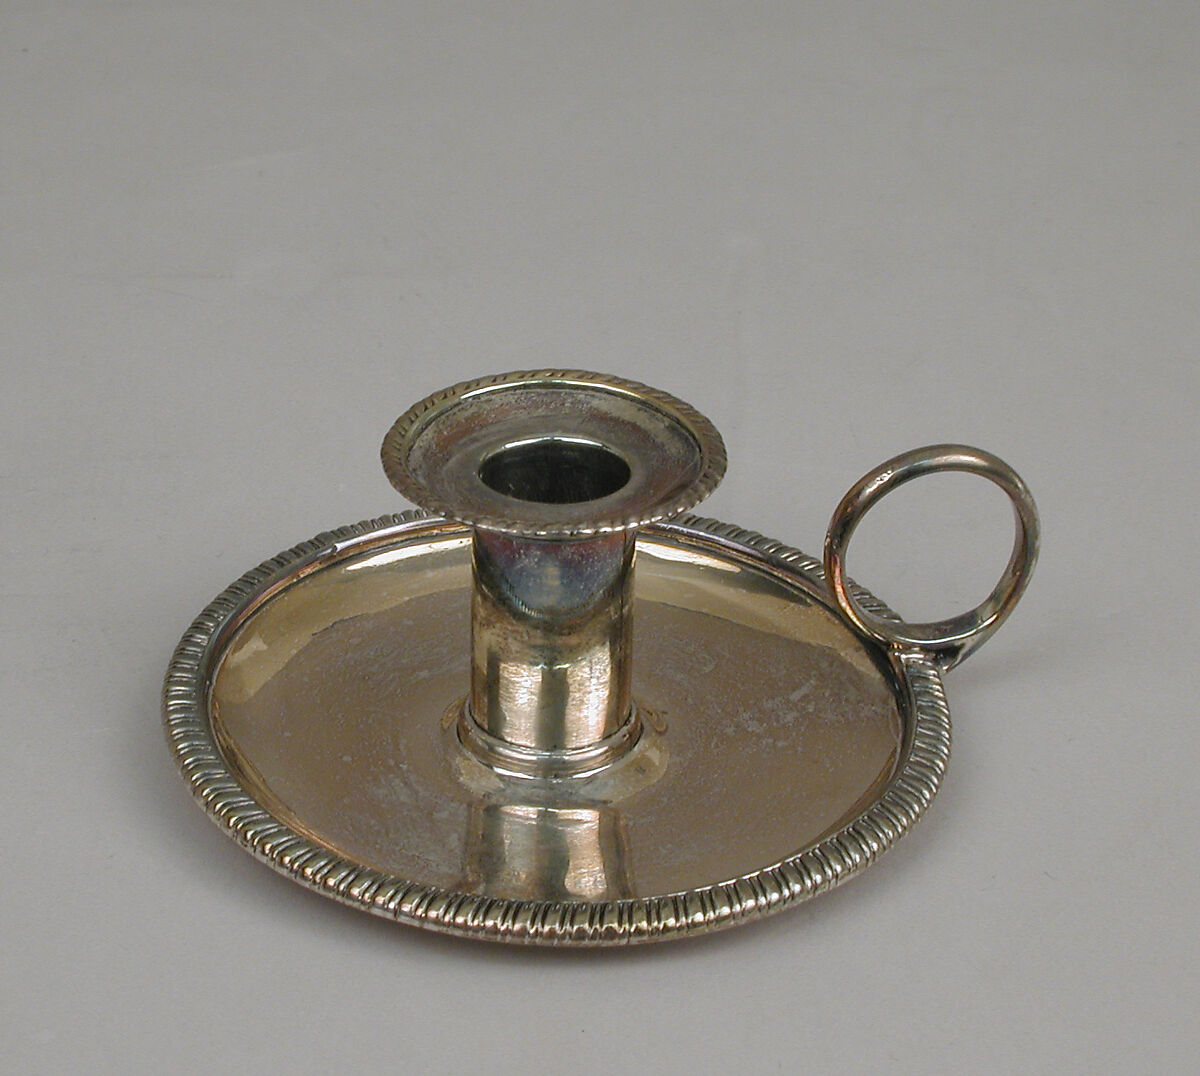 Chamber candlestick, William Fountain (active 1791– after 1821), Silver, British, London 